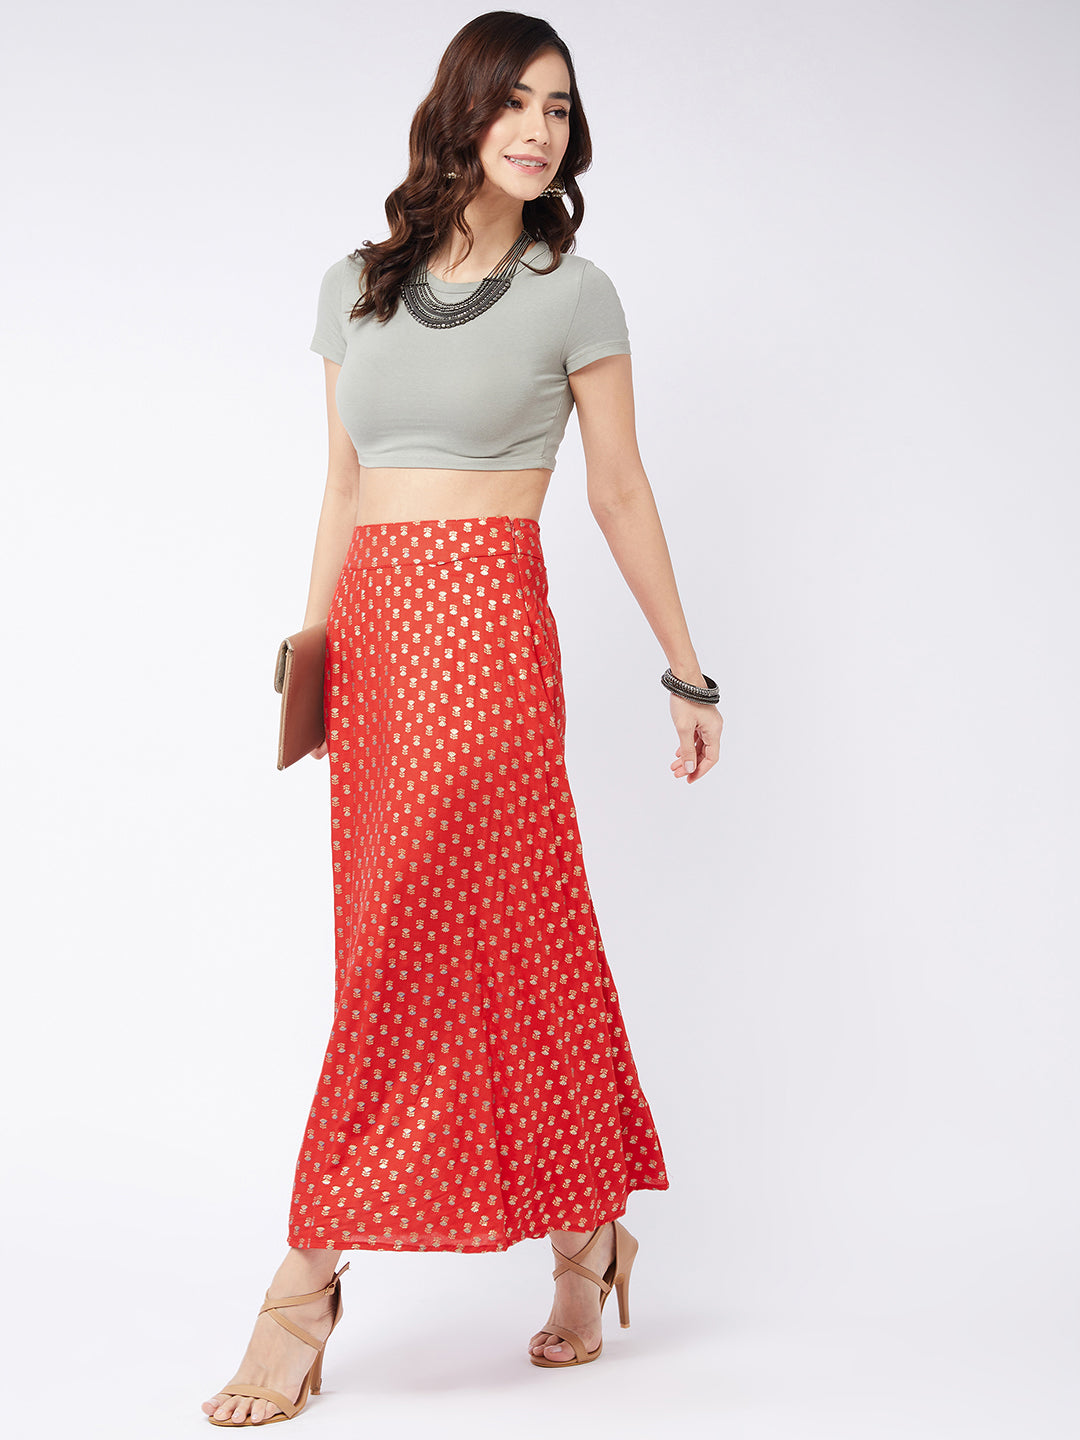 Current Red Gold Print Long Skirt